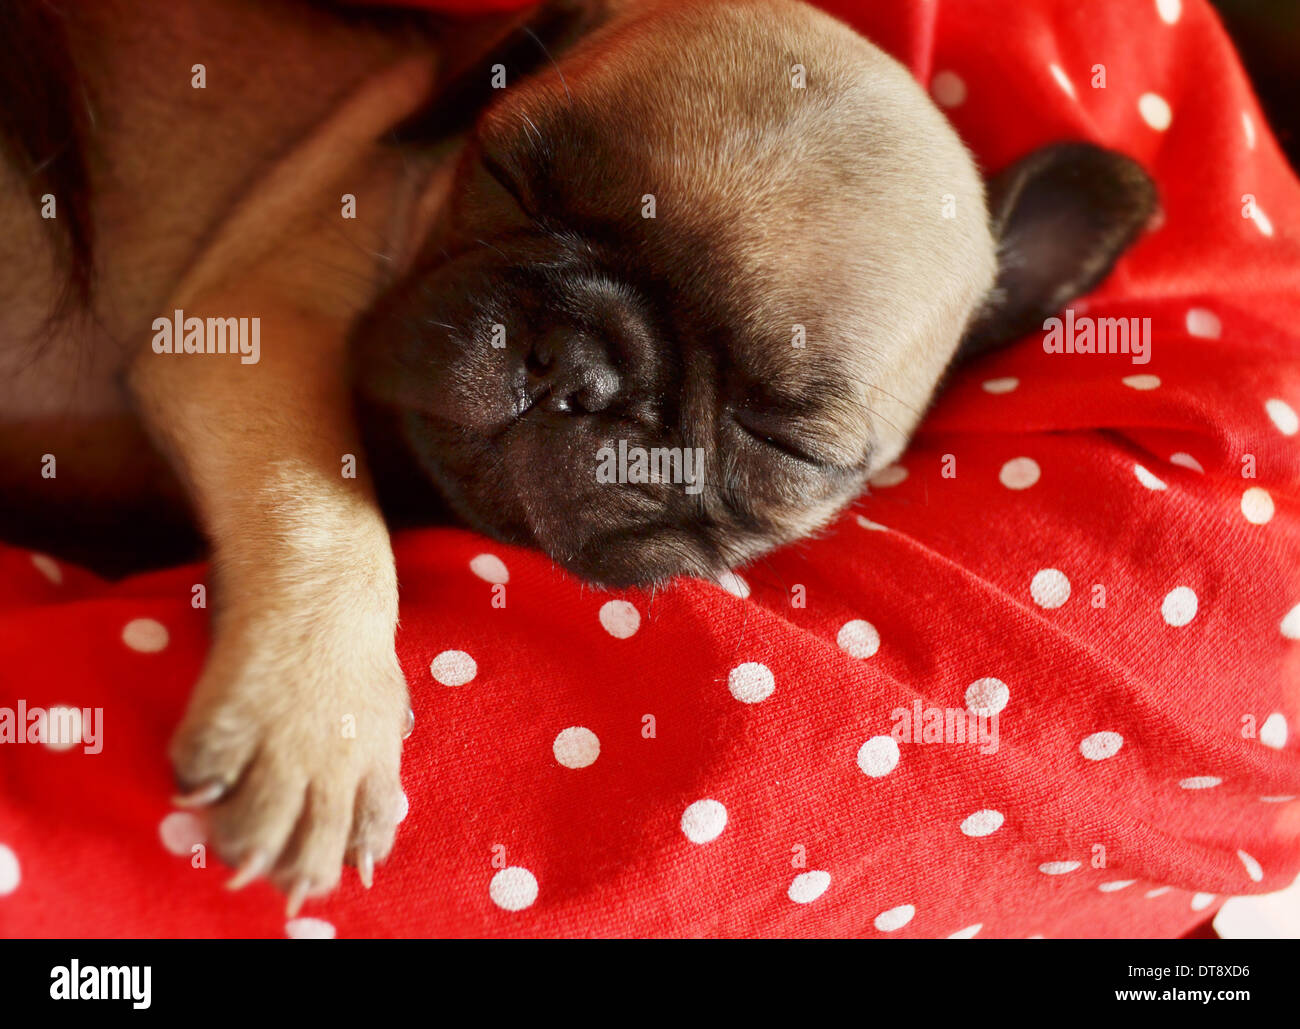 Pug puppy is sleeping on the bed Stock Photo